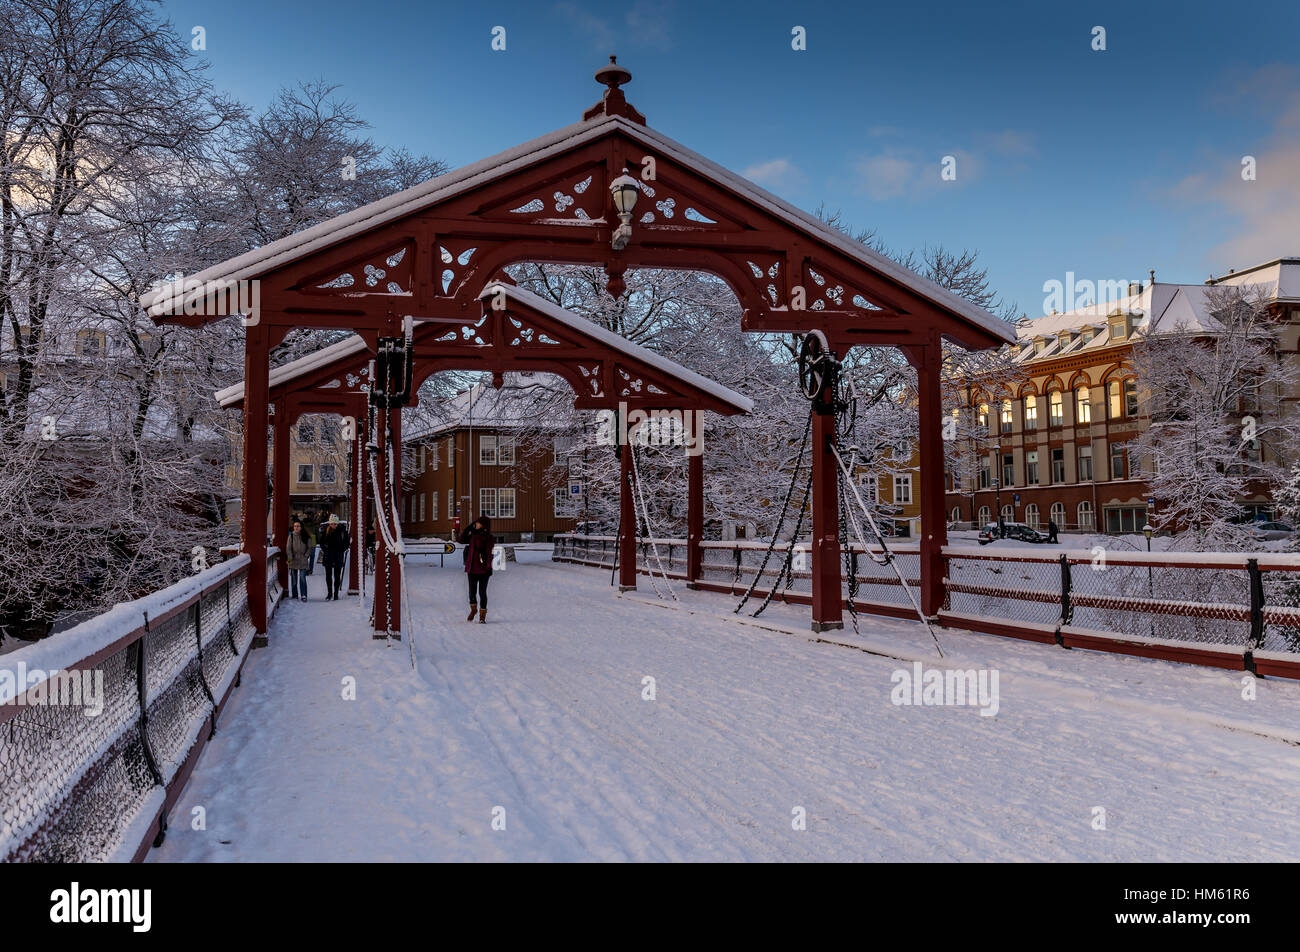 Gamle bybro, the old town bridge over the river Nid in Trondheim, Norway. The view is seen in Winter with blue sky. Stock Photo